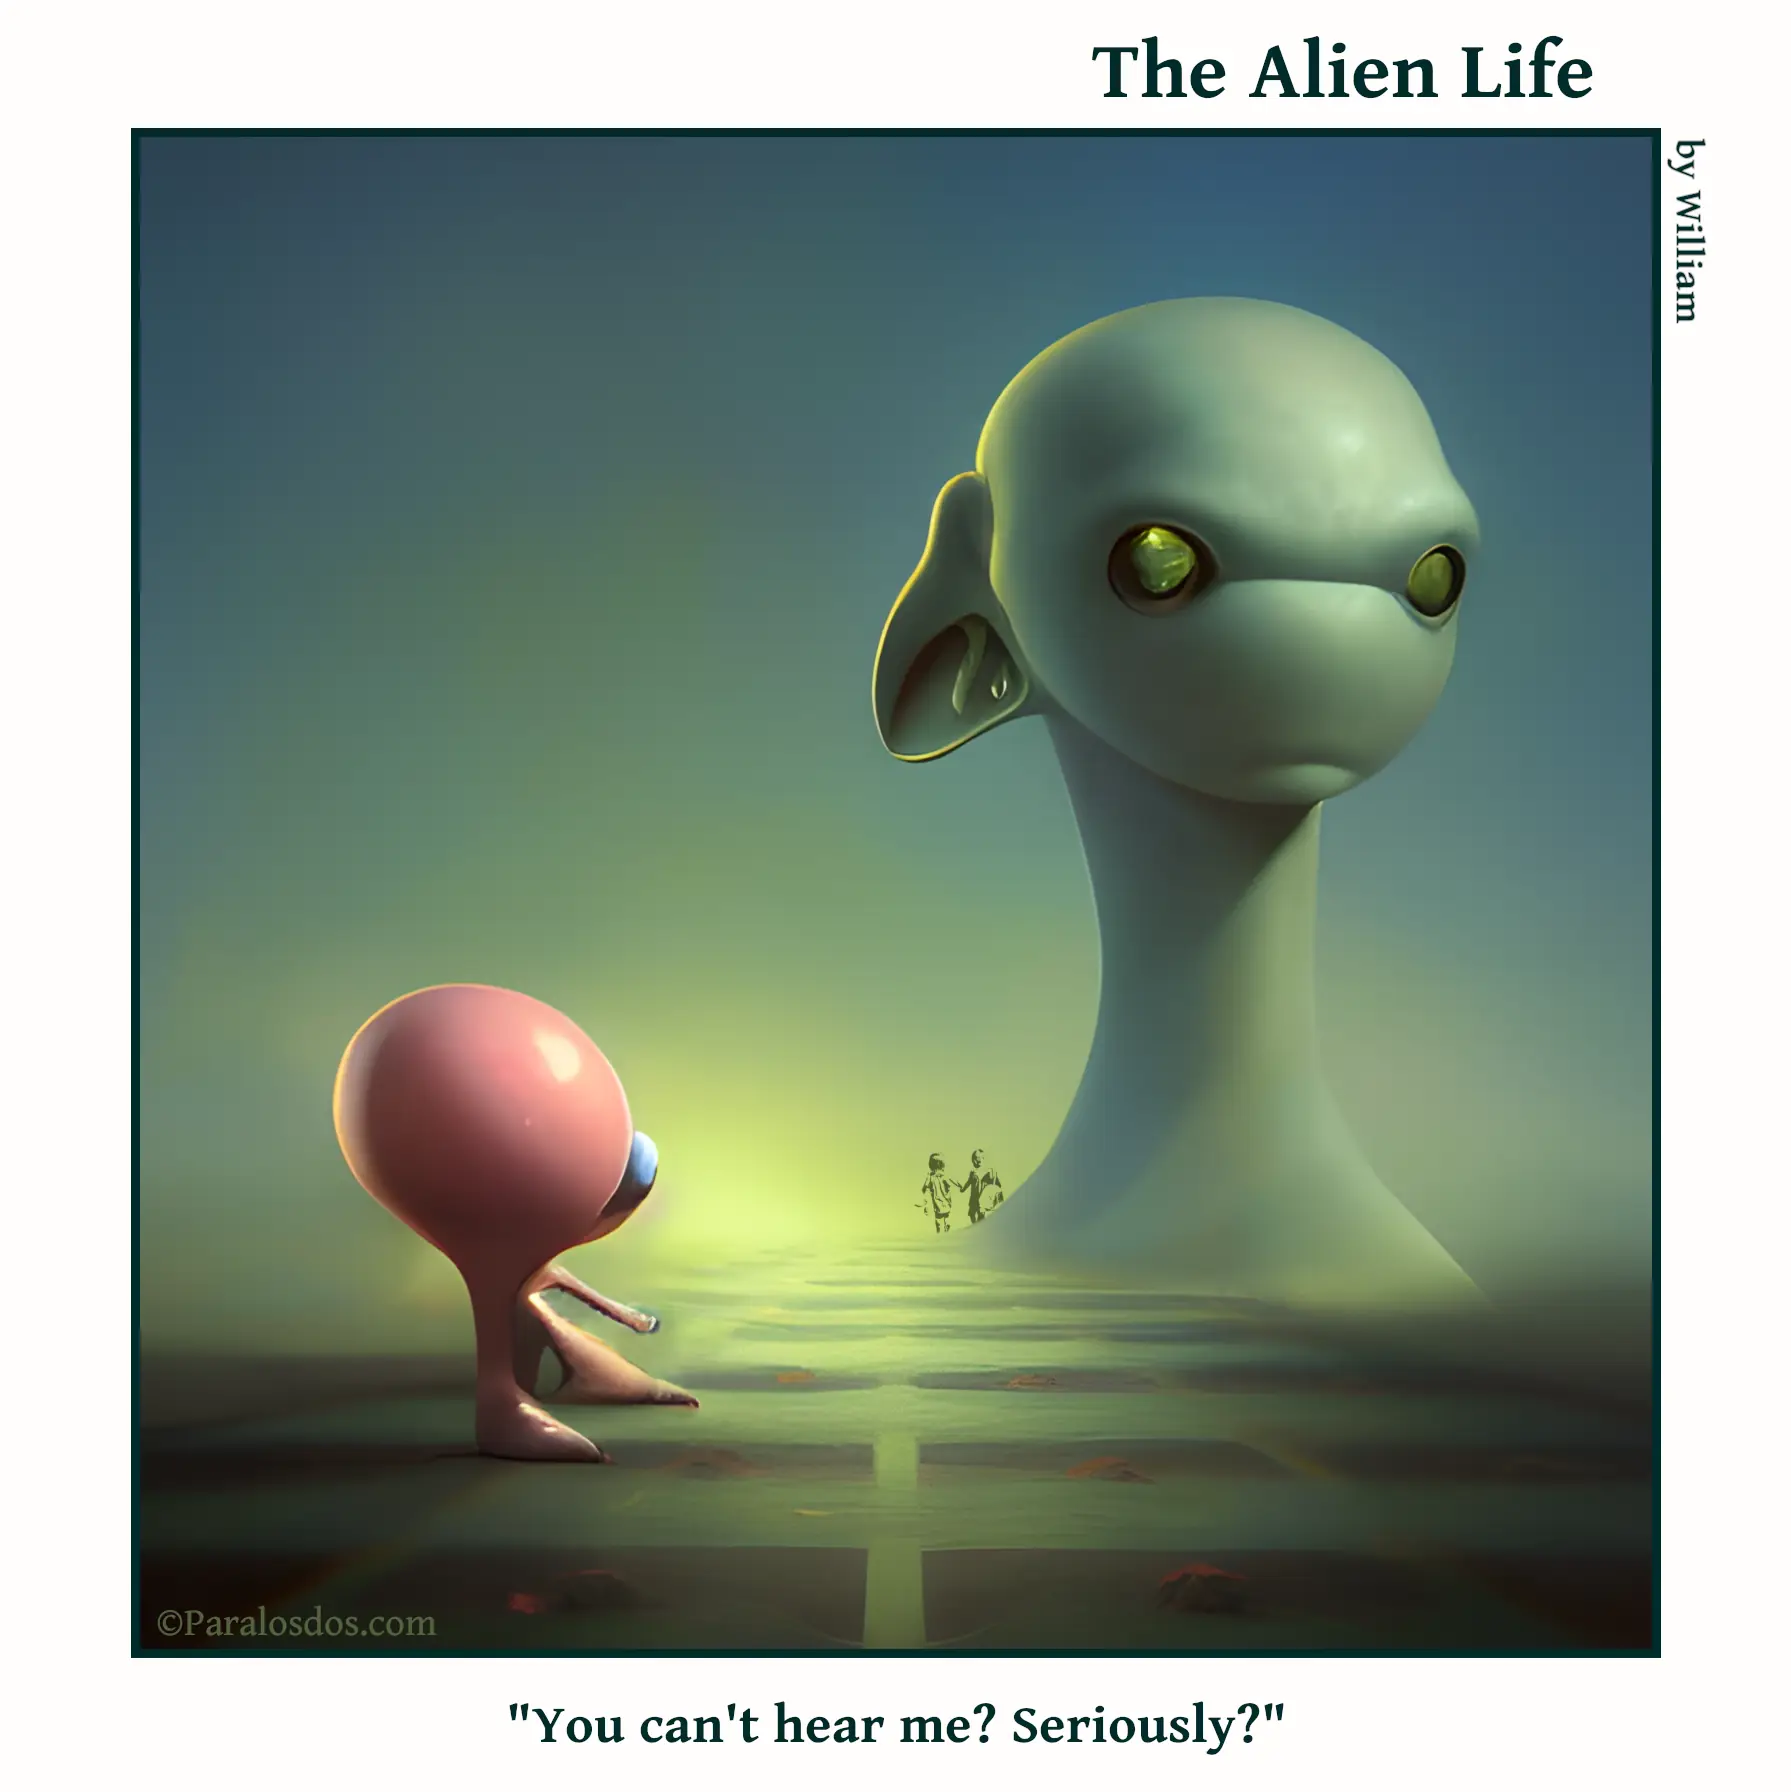 The Alien Life, one panel Comic. A big alien head is in the background to the right, this alien is turned slightly to the left and has a huge right ear. In the foreground to the left is an alien. The caption reads: "You can't hear me? Seriously?"